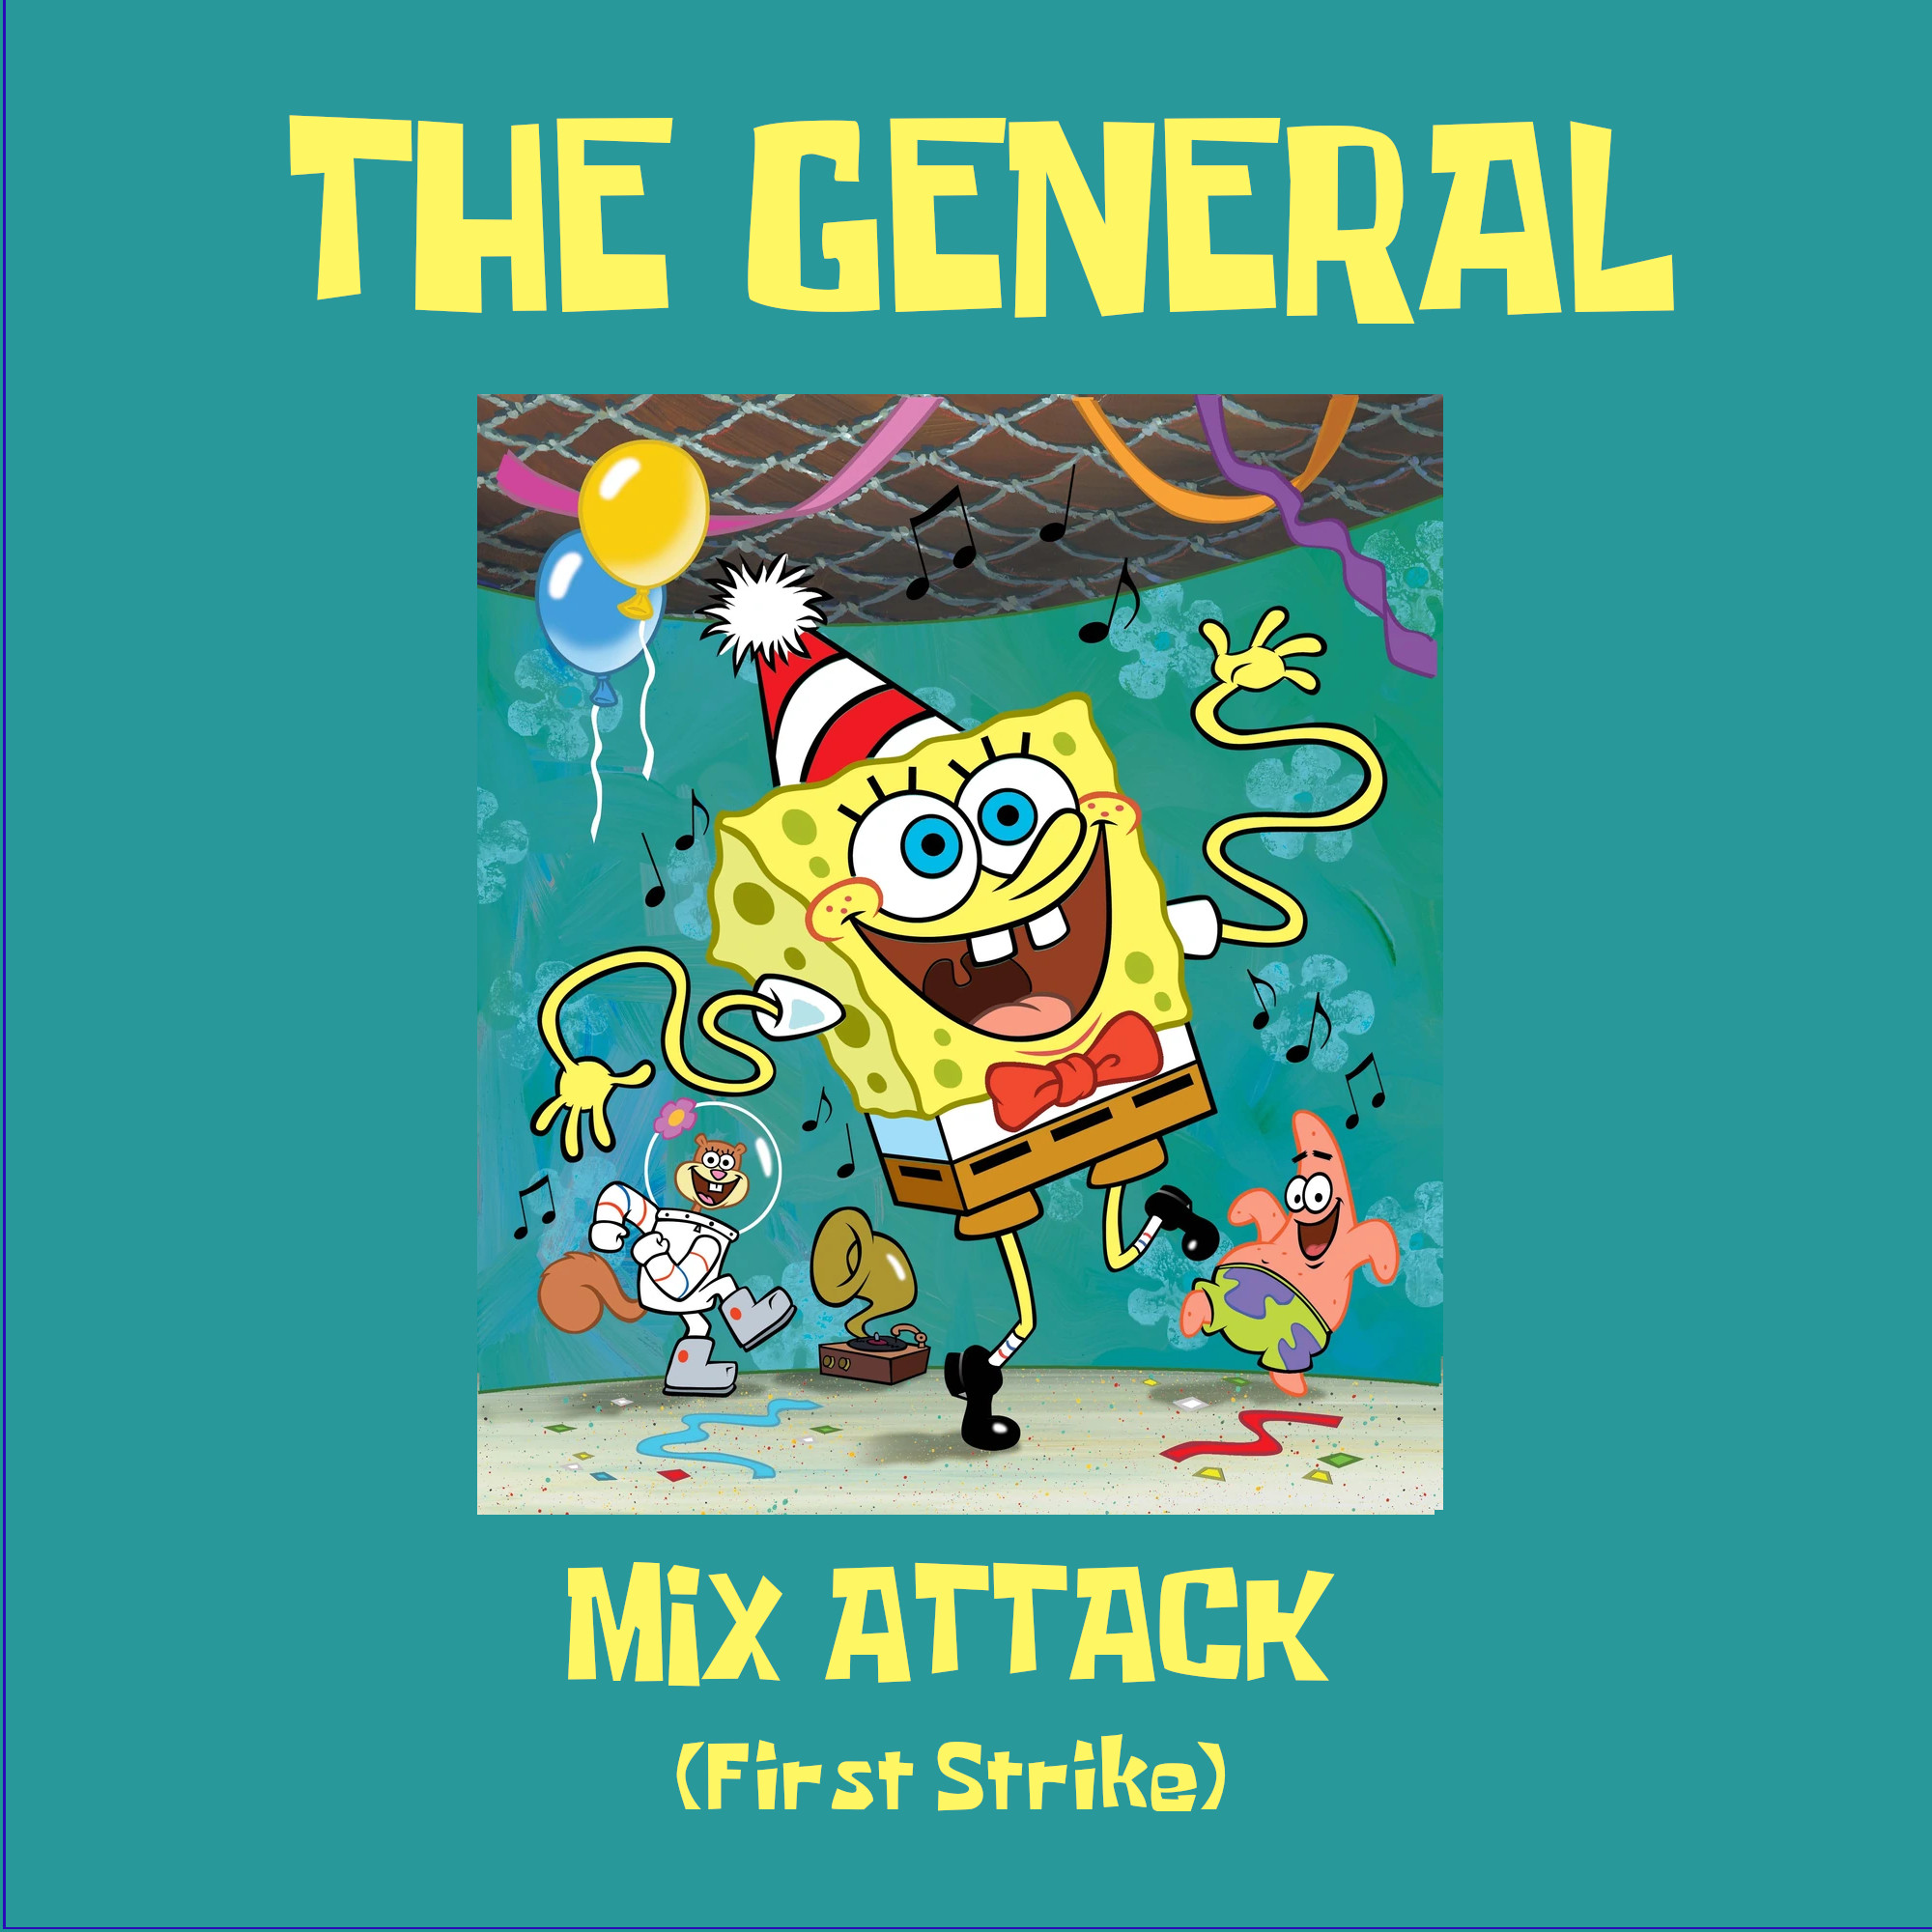 The General - Mix Attack (First Strike) (2021) 1048_2974801c0a3c